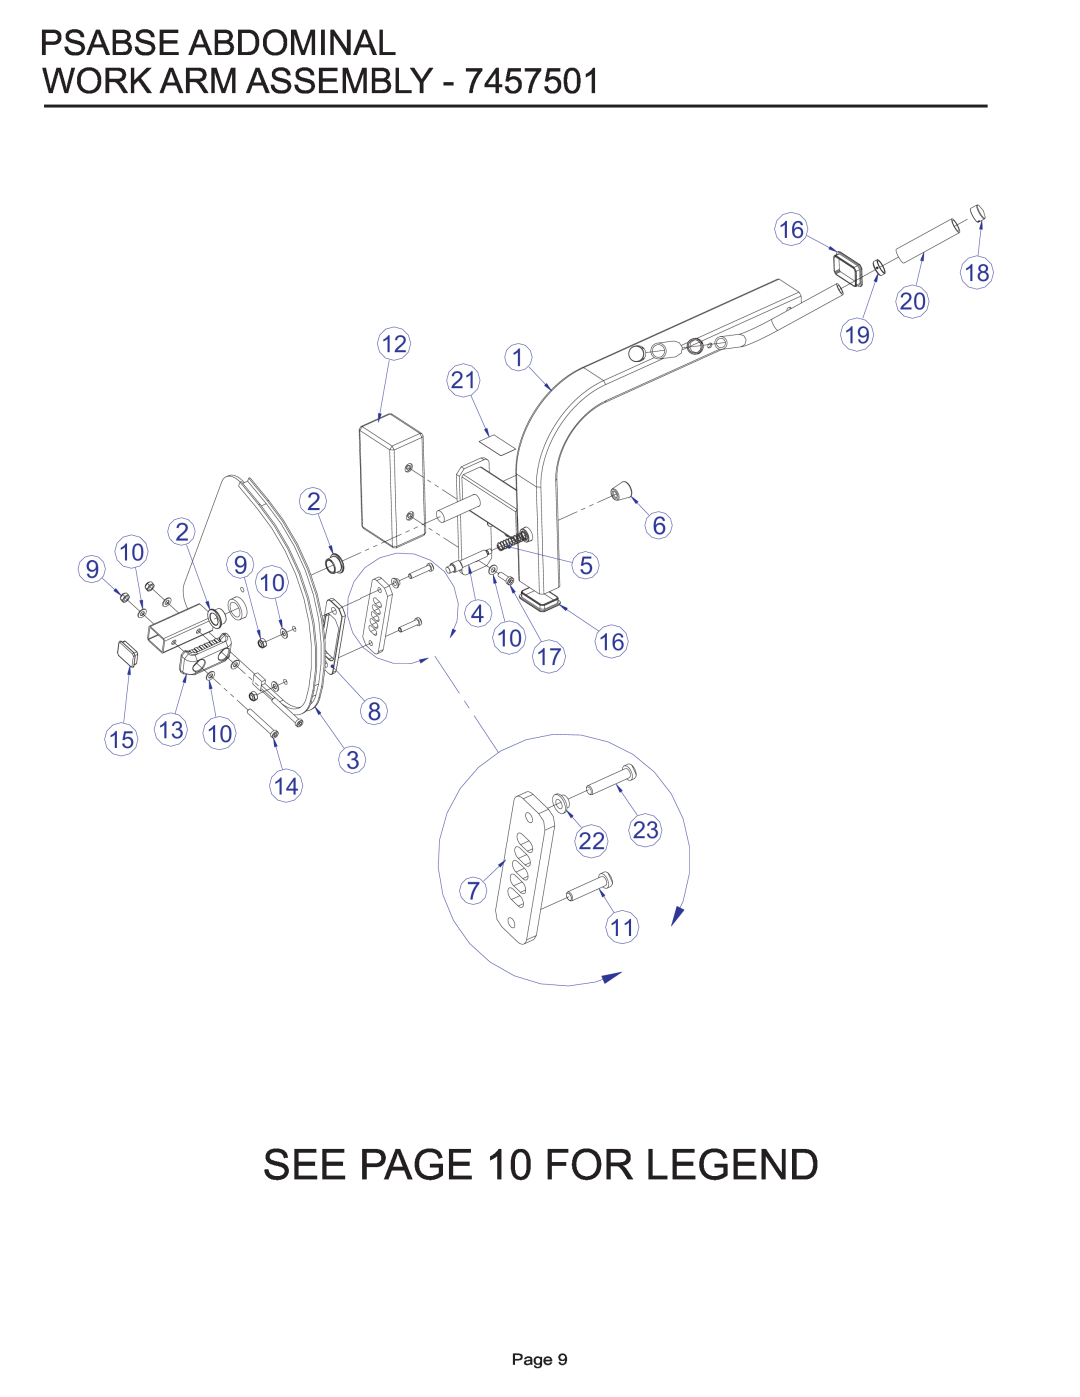 Life Fitness PSABSE manual SEE PAGE 10 FOR LEGEND, Psabse Abdominal Work Arm Assembly, 15 13, Page 